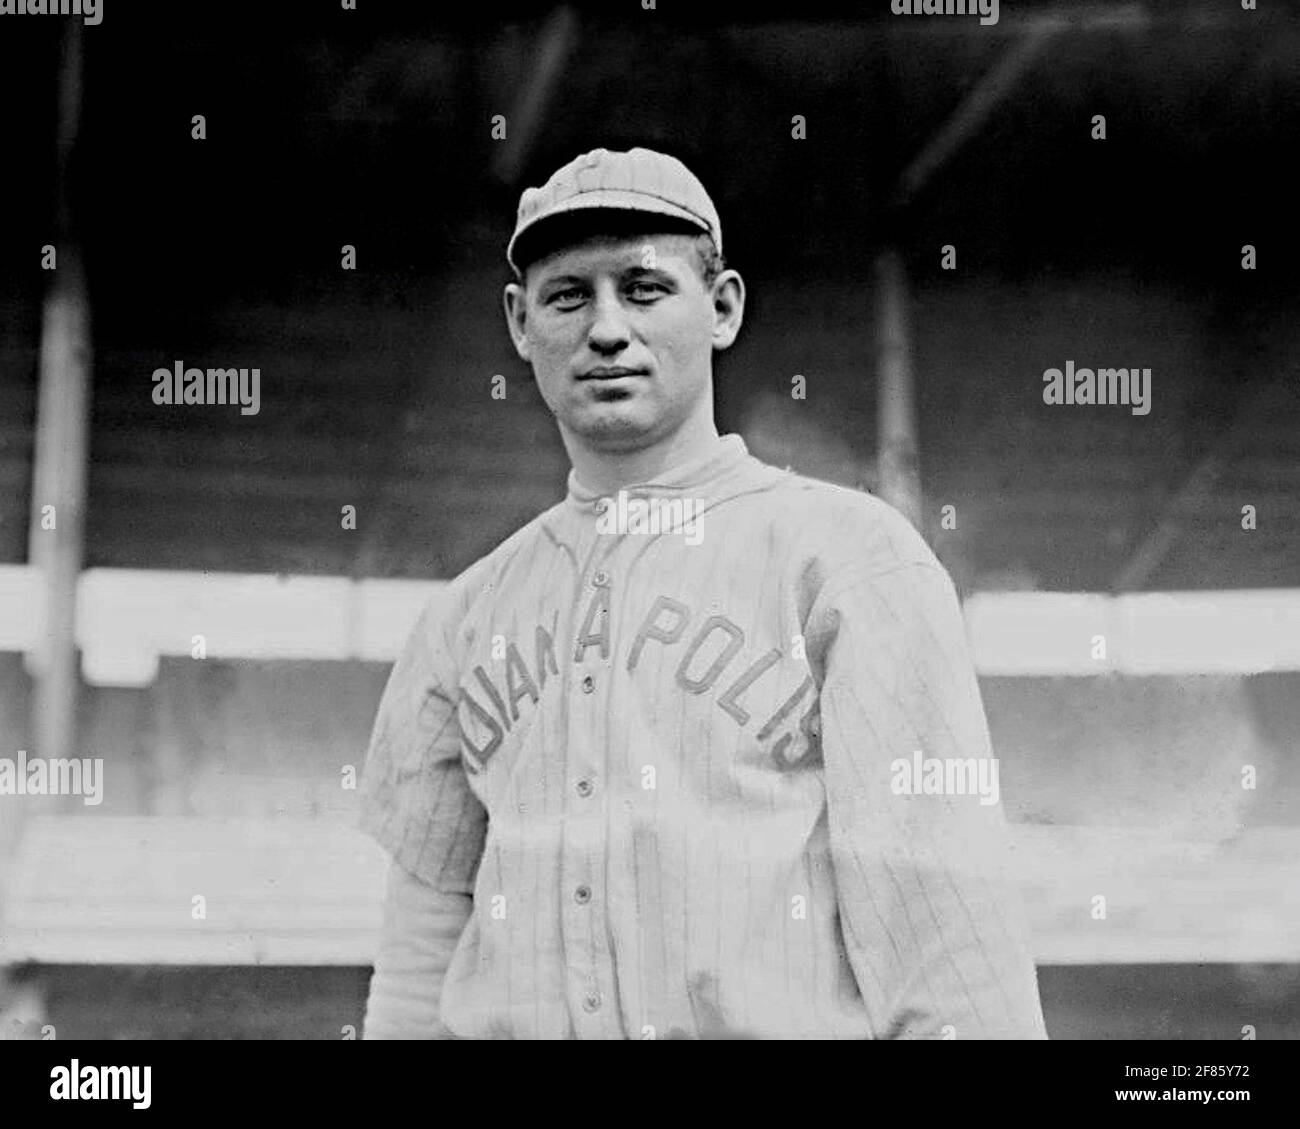 George Textor, Indianapolis Hoosiers, Federal League, 1915. Stock Photo